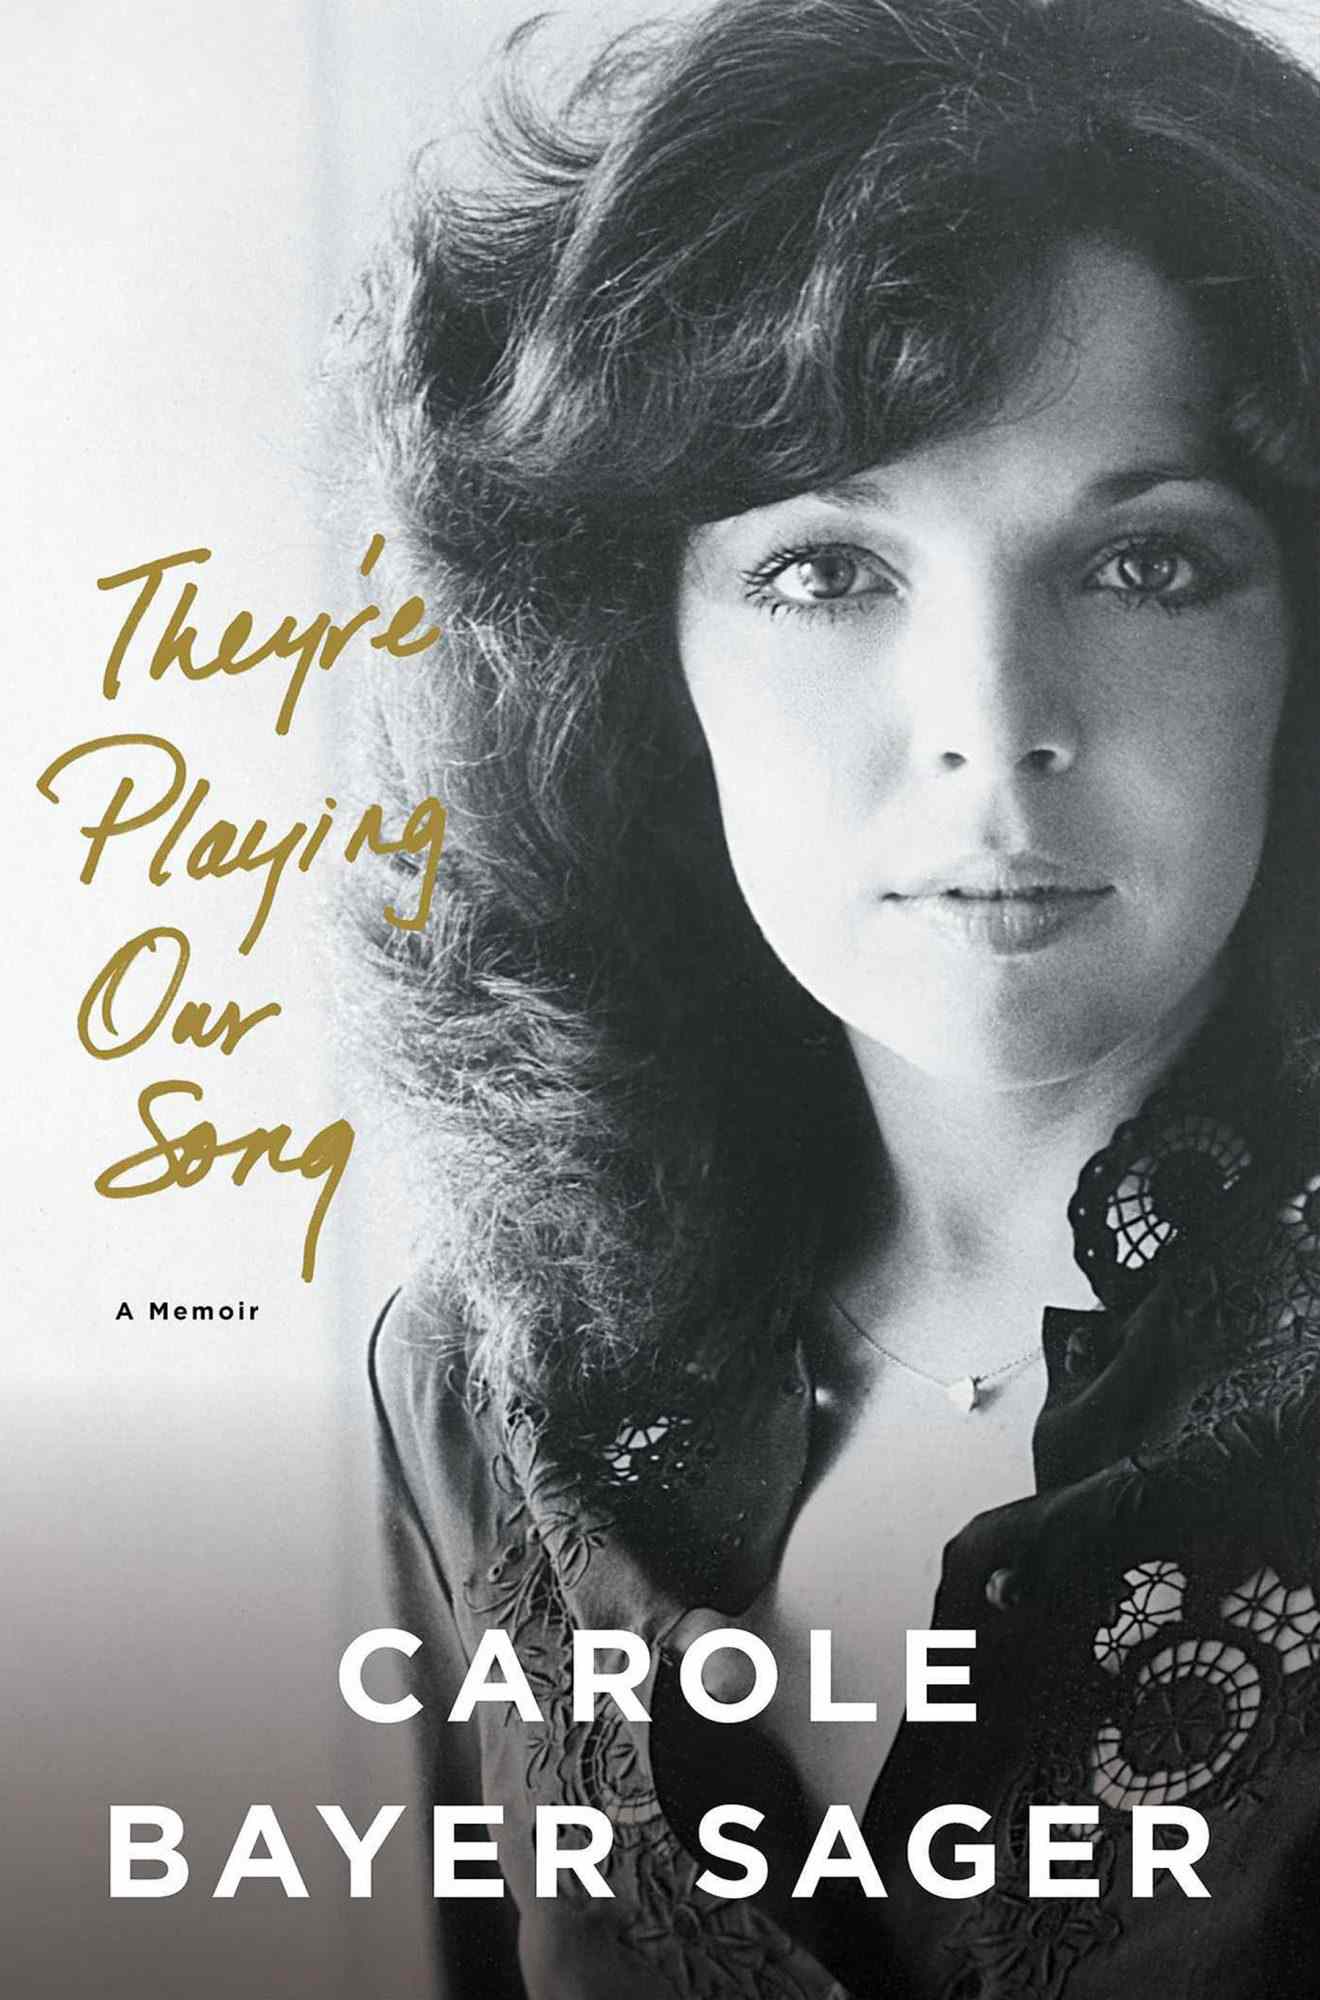 50. Carole Bayer Sager, They&rsquo;re Playing Our Song